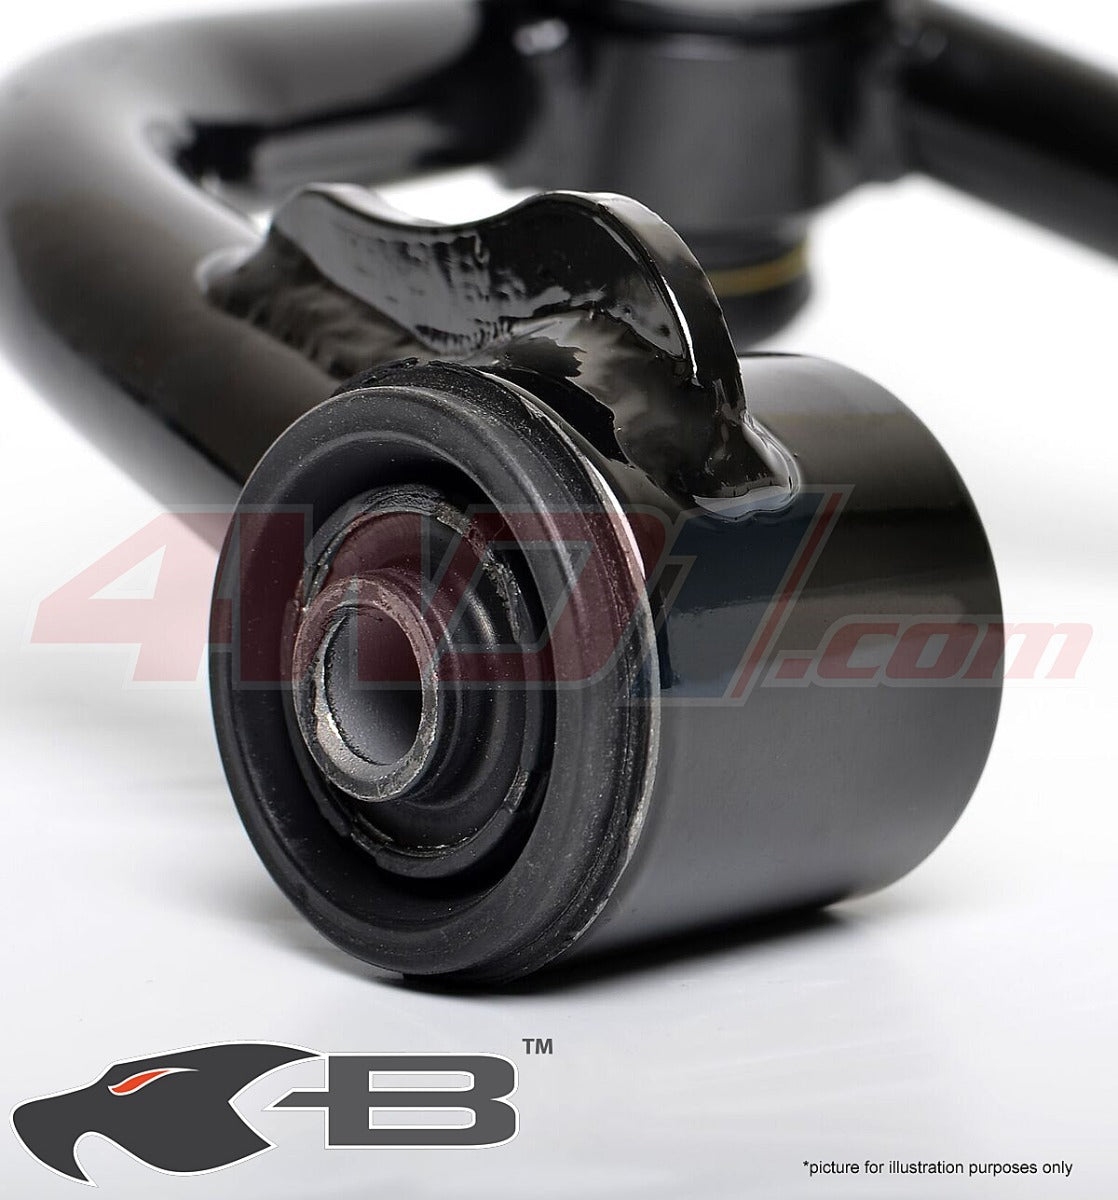 Copy of BLACKHAWK UPPER FRONT CONTROL ARMS FORD RANGER PX/PXII & PX3